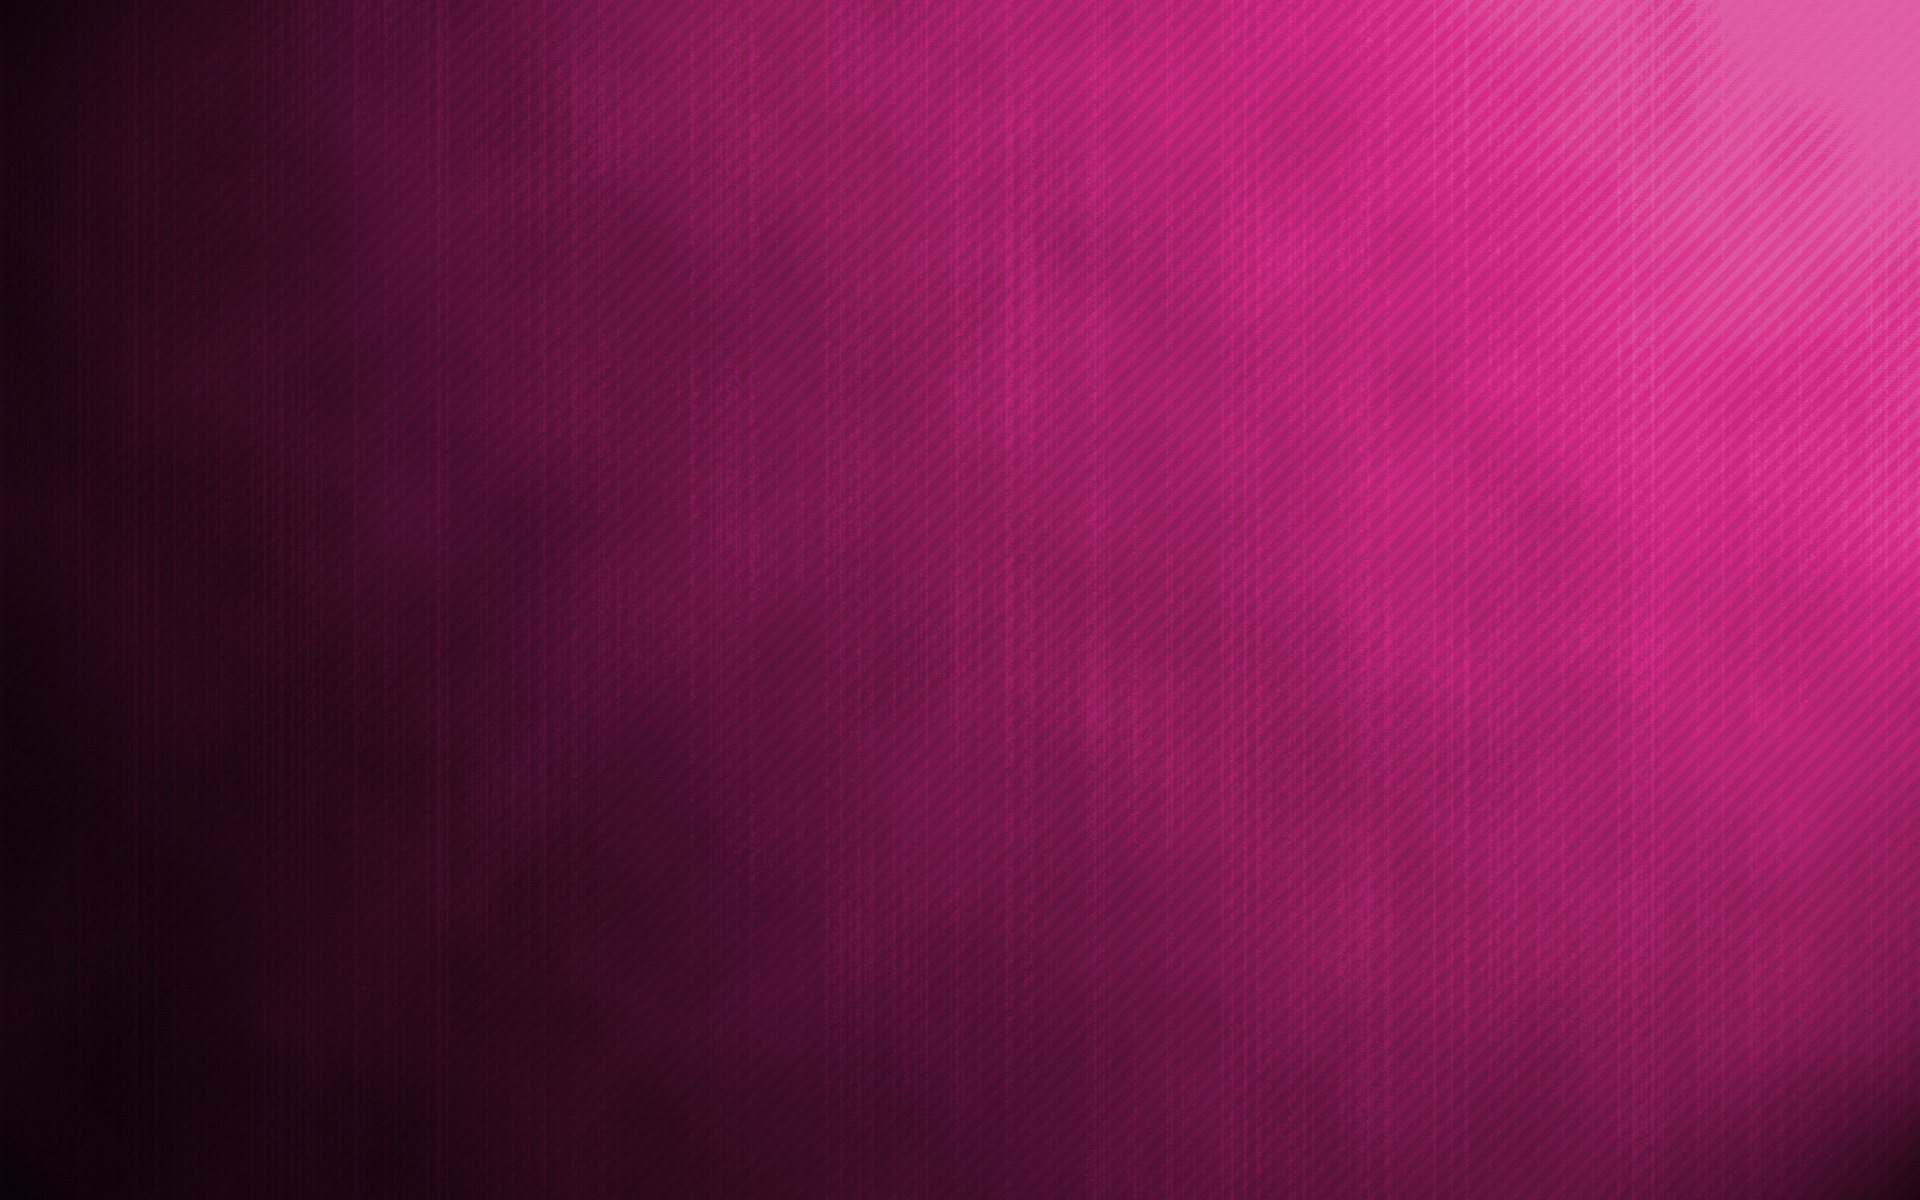 Gallery For Gt Pink Background Wallpaper